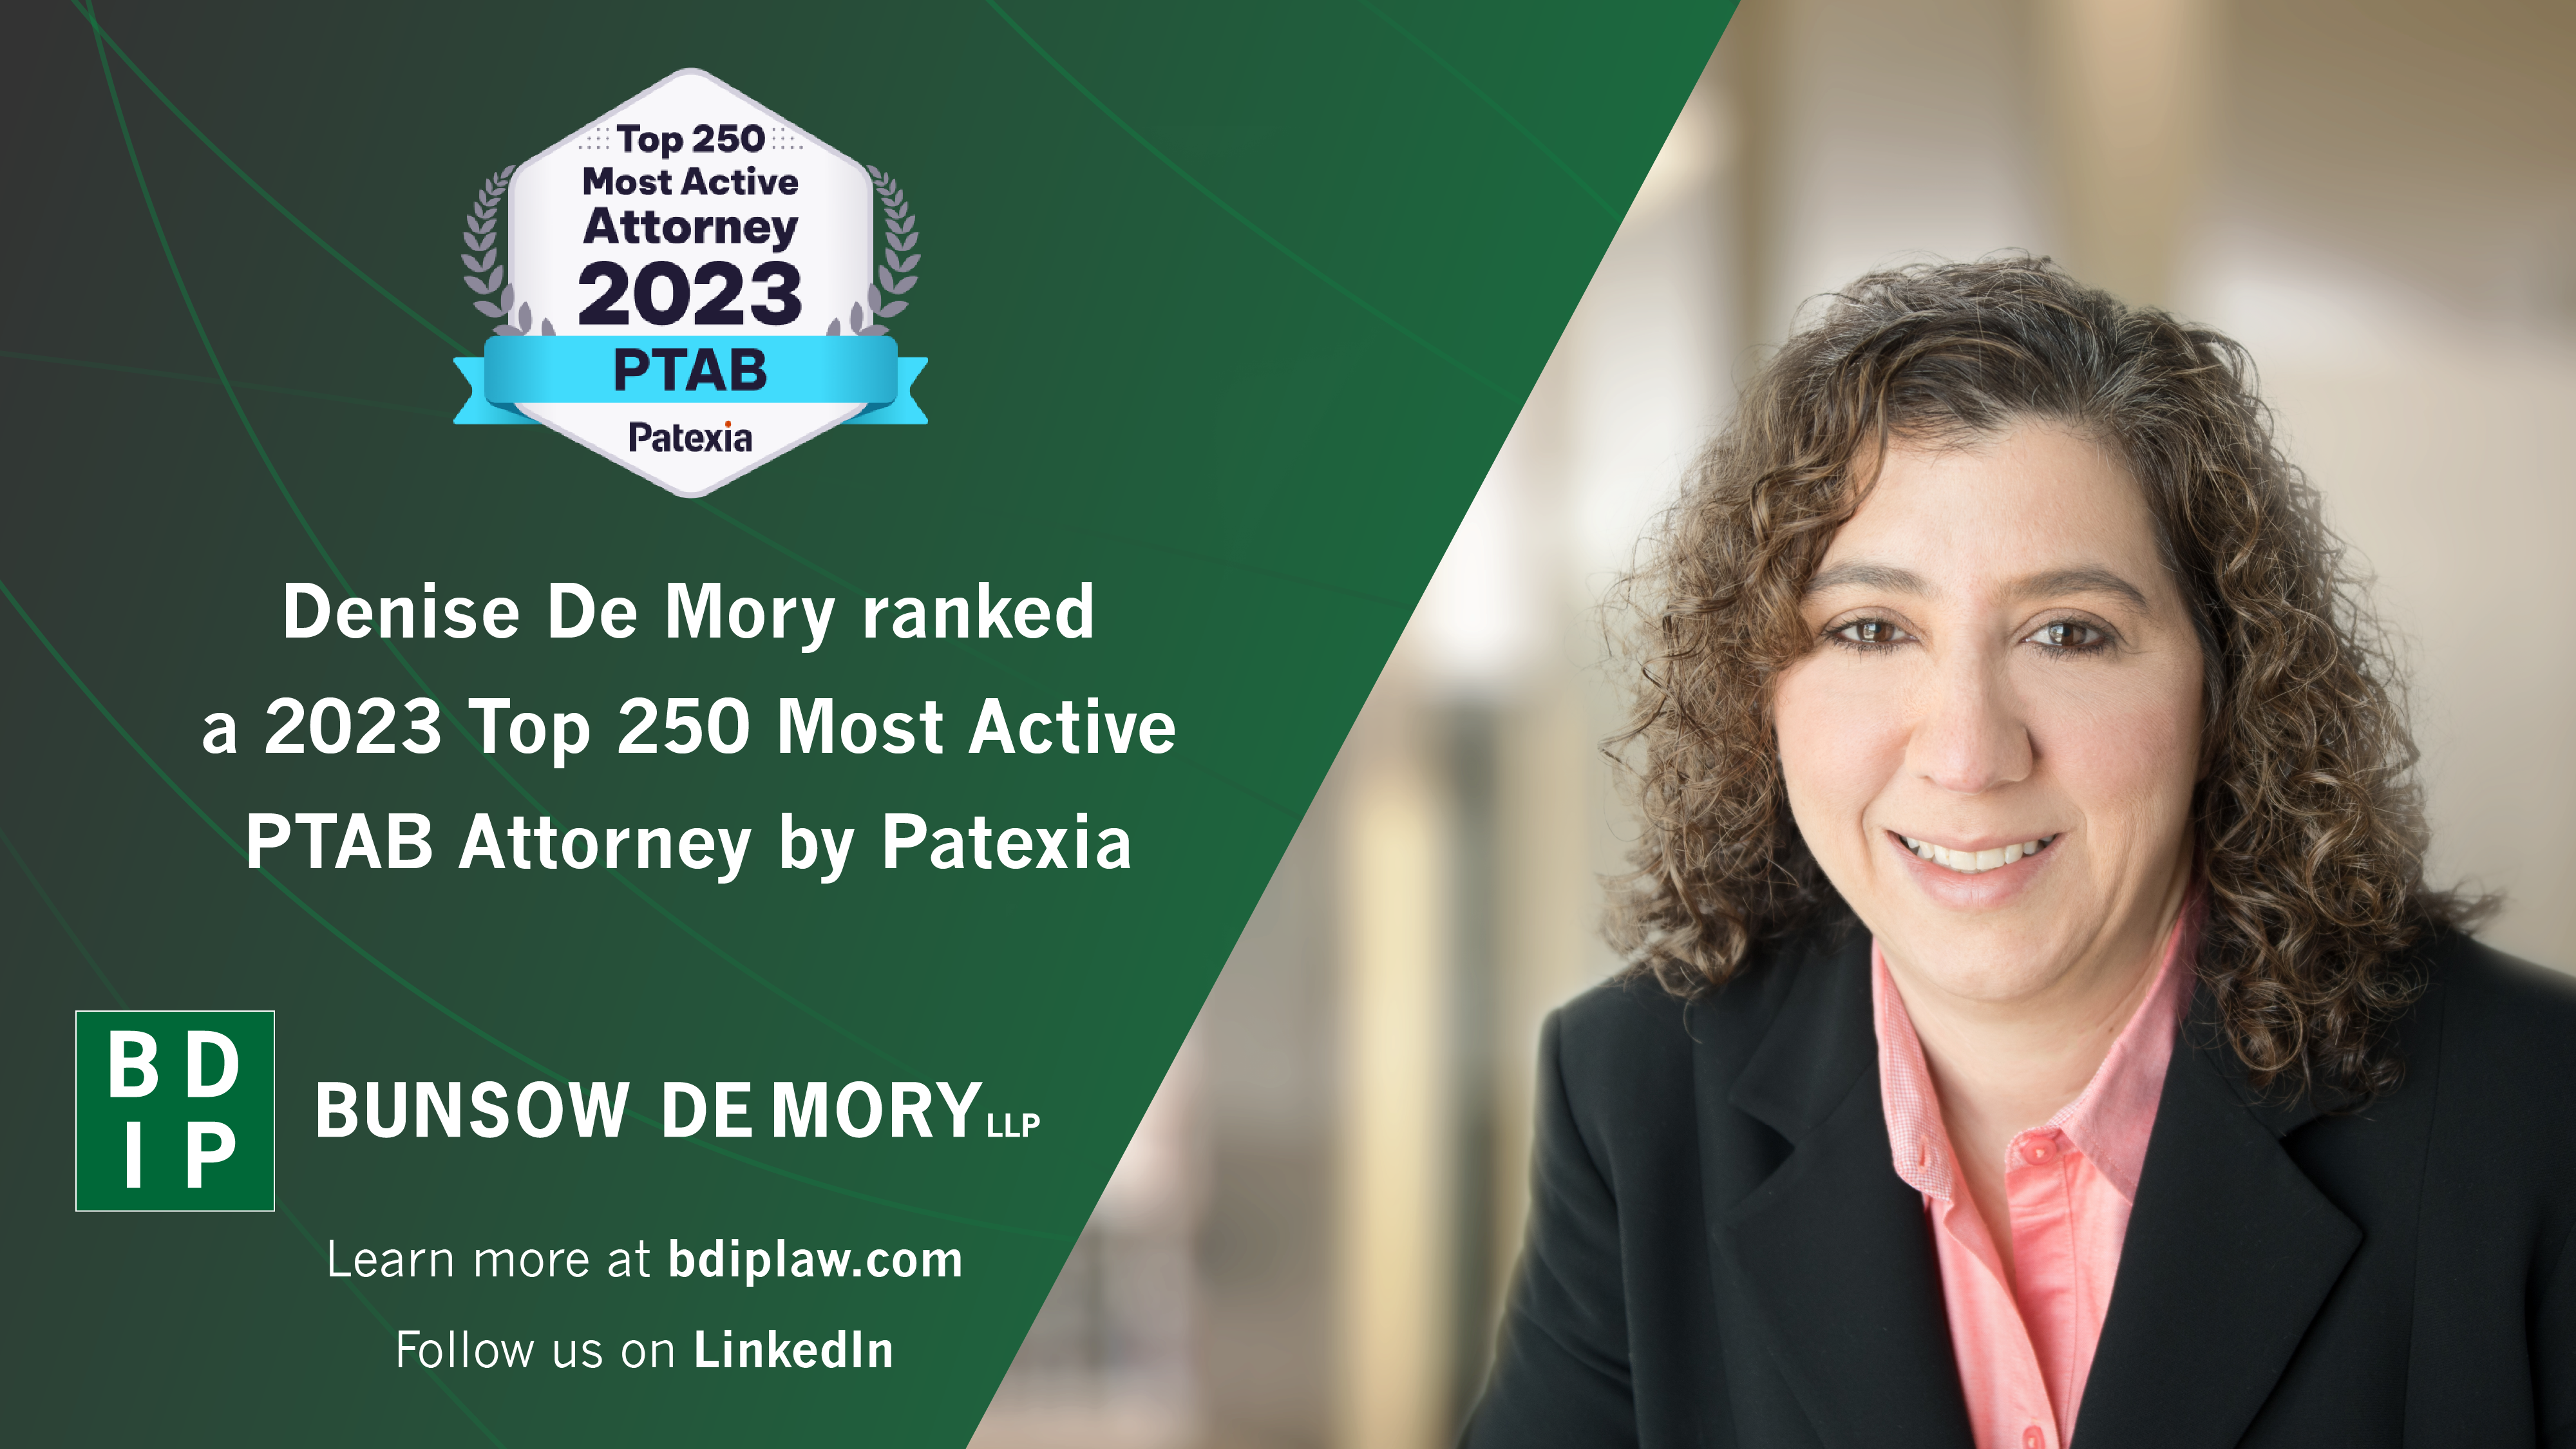 Denise De Mory Ranked Among Top 250 Most Active PTAB Attorneys